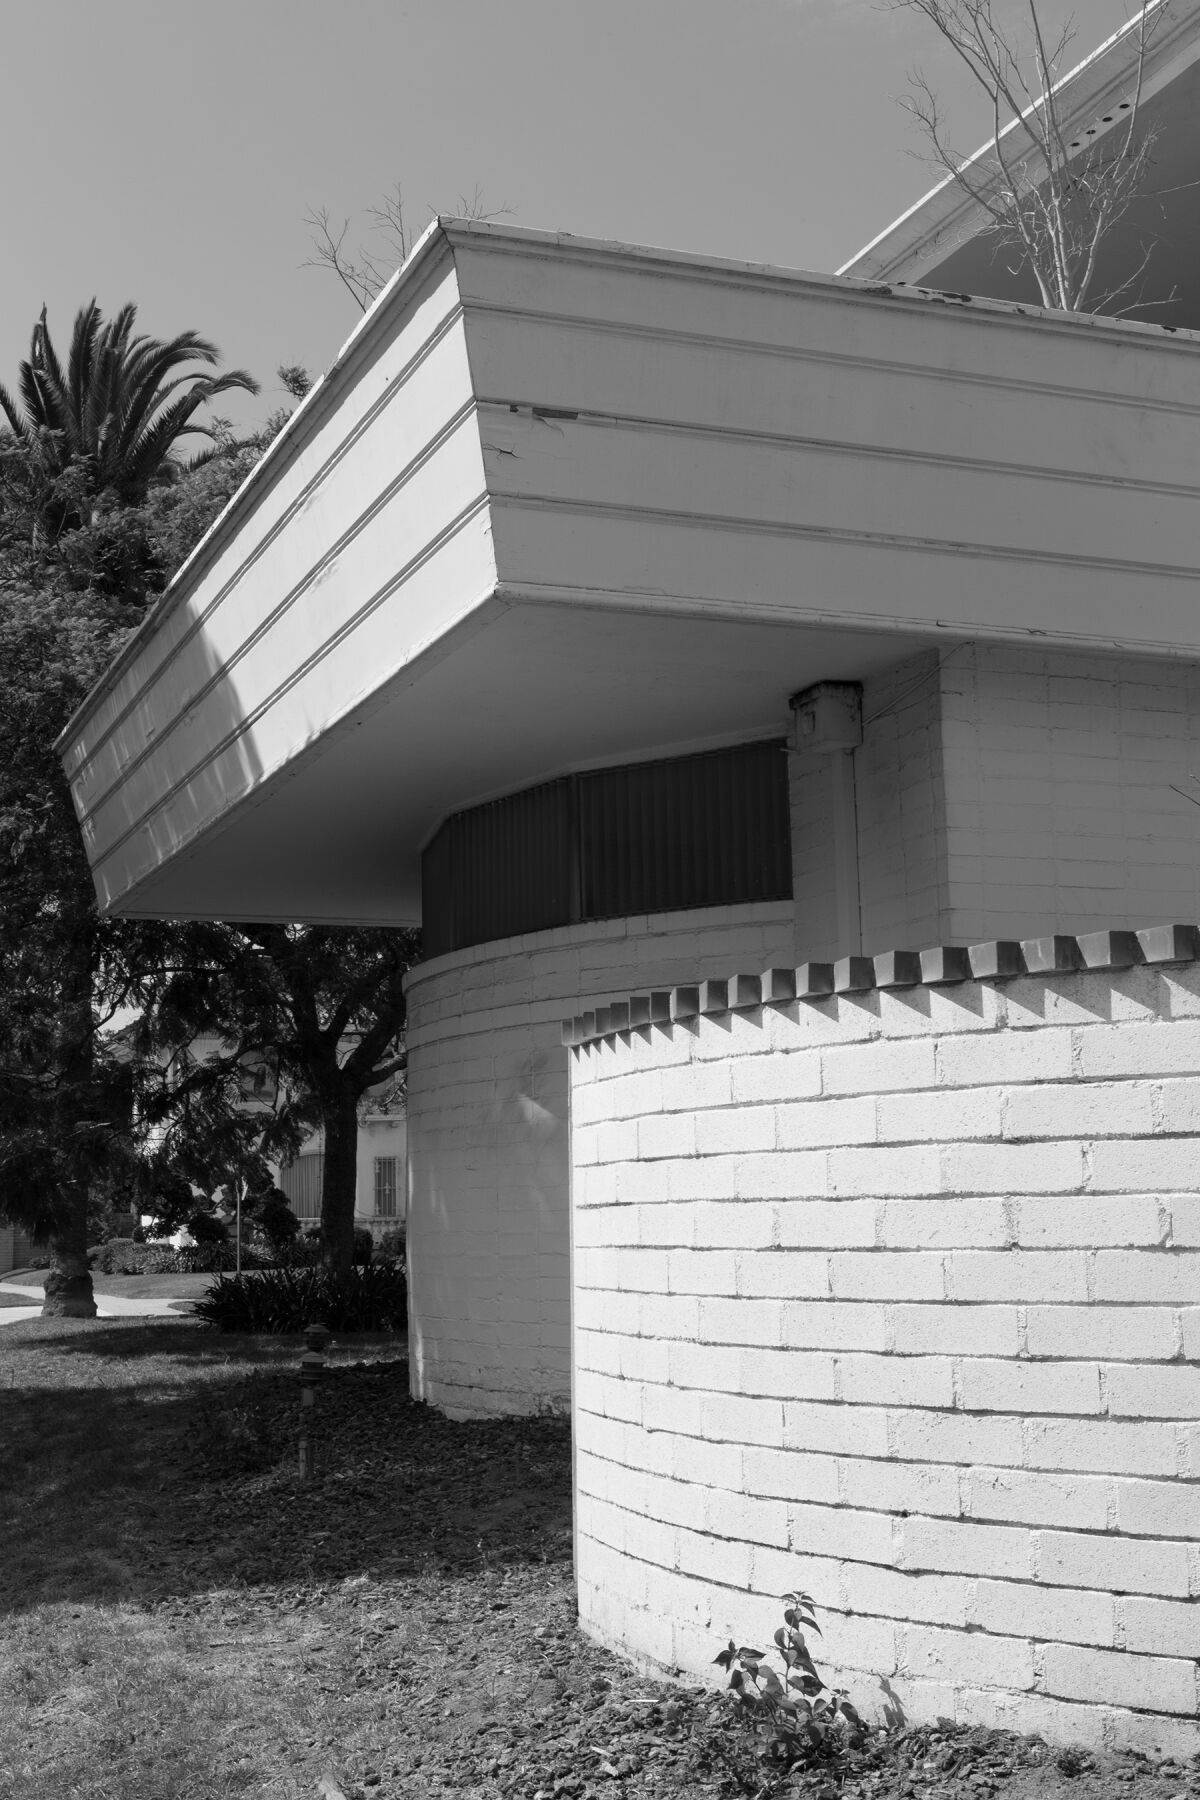 A black-and-white image of the Paul Williams Residence shows a curving wall with a serrated edge.